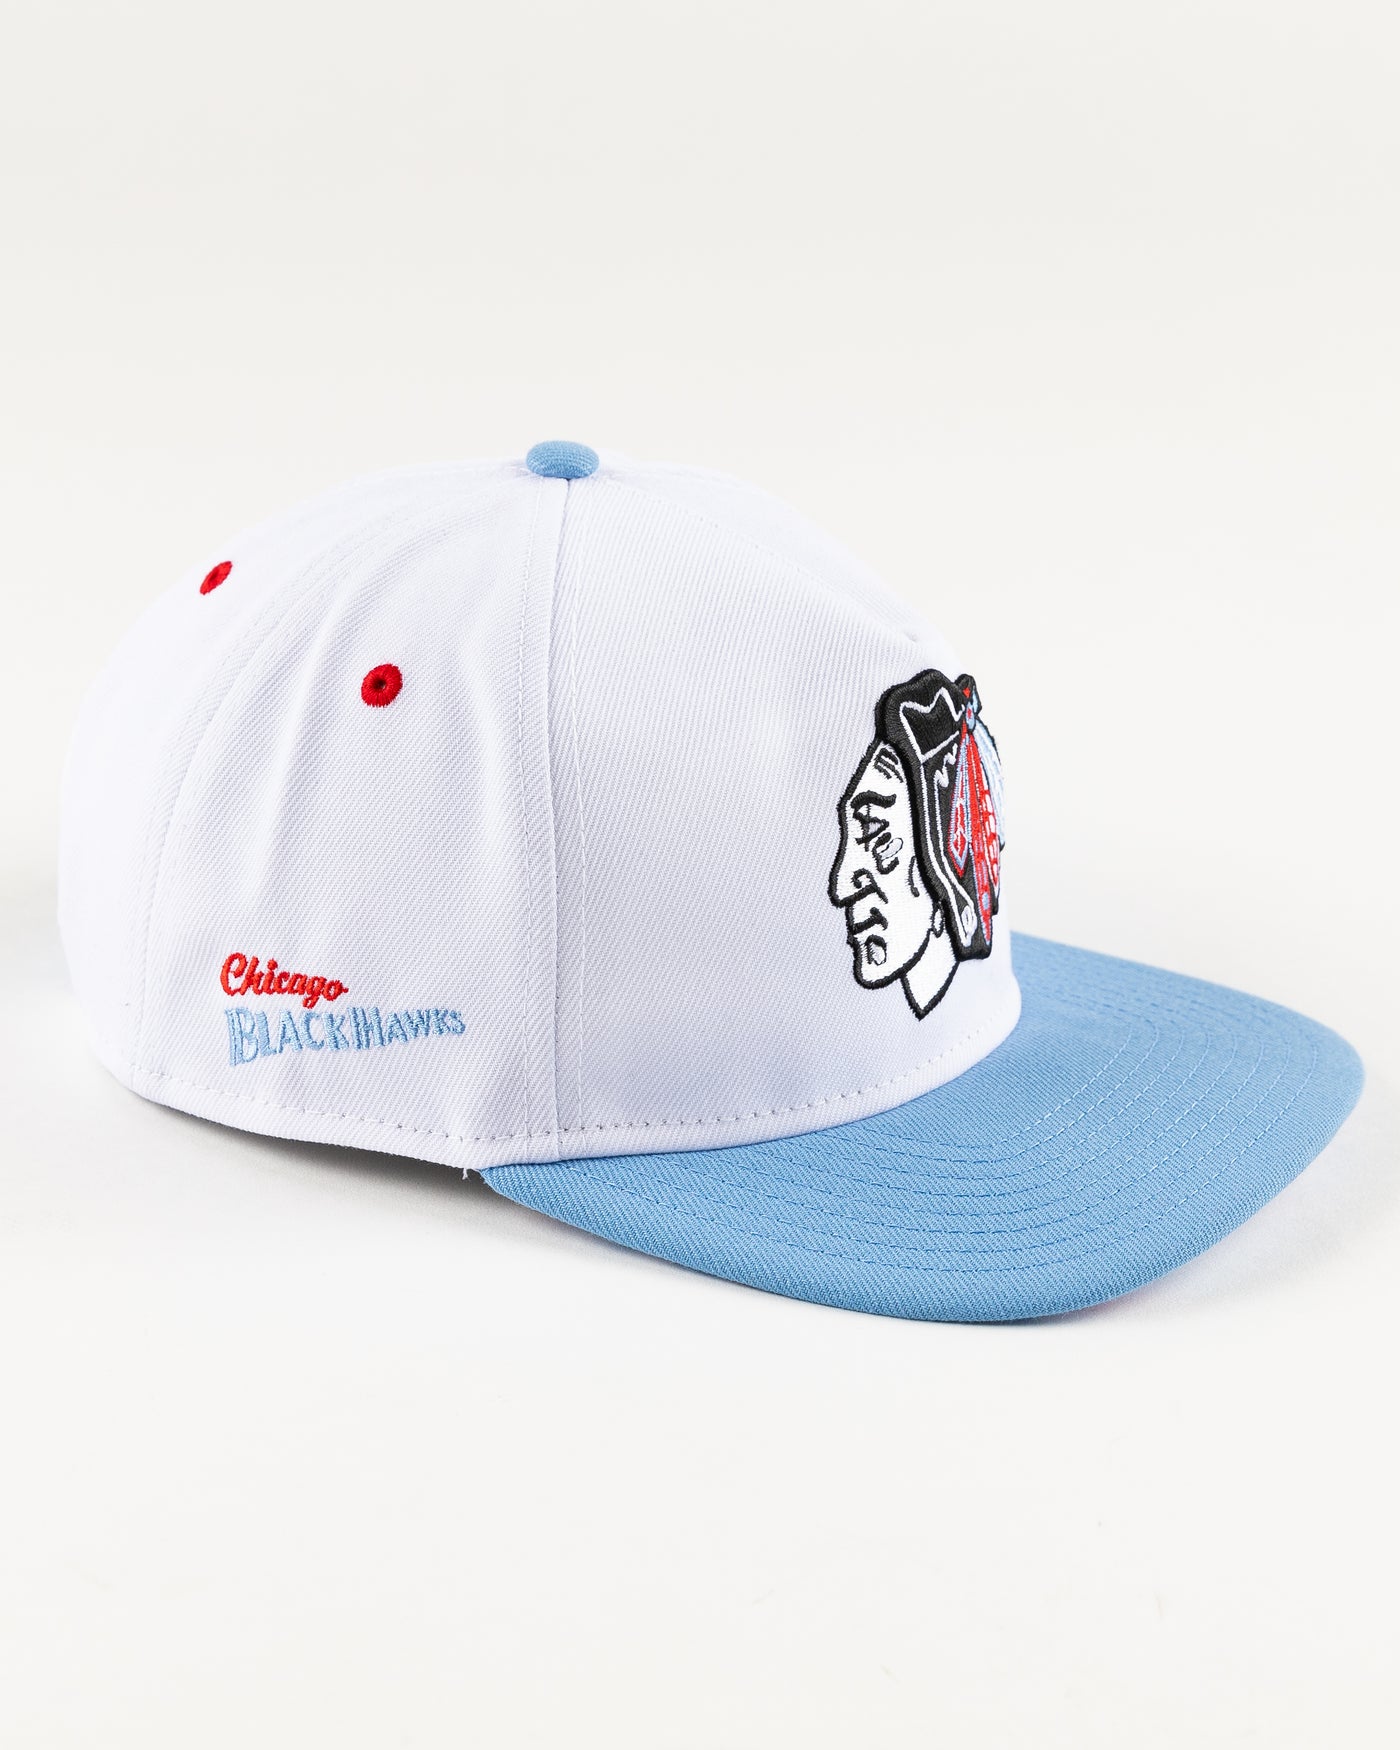 white and blue New Era snapback with Chicago Blackhawks primary logo on front - right angle lay flat